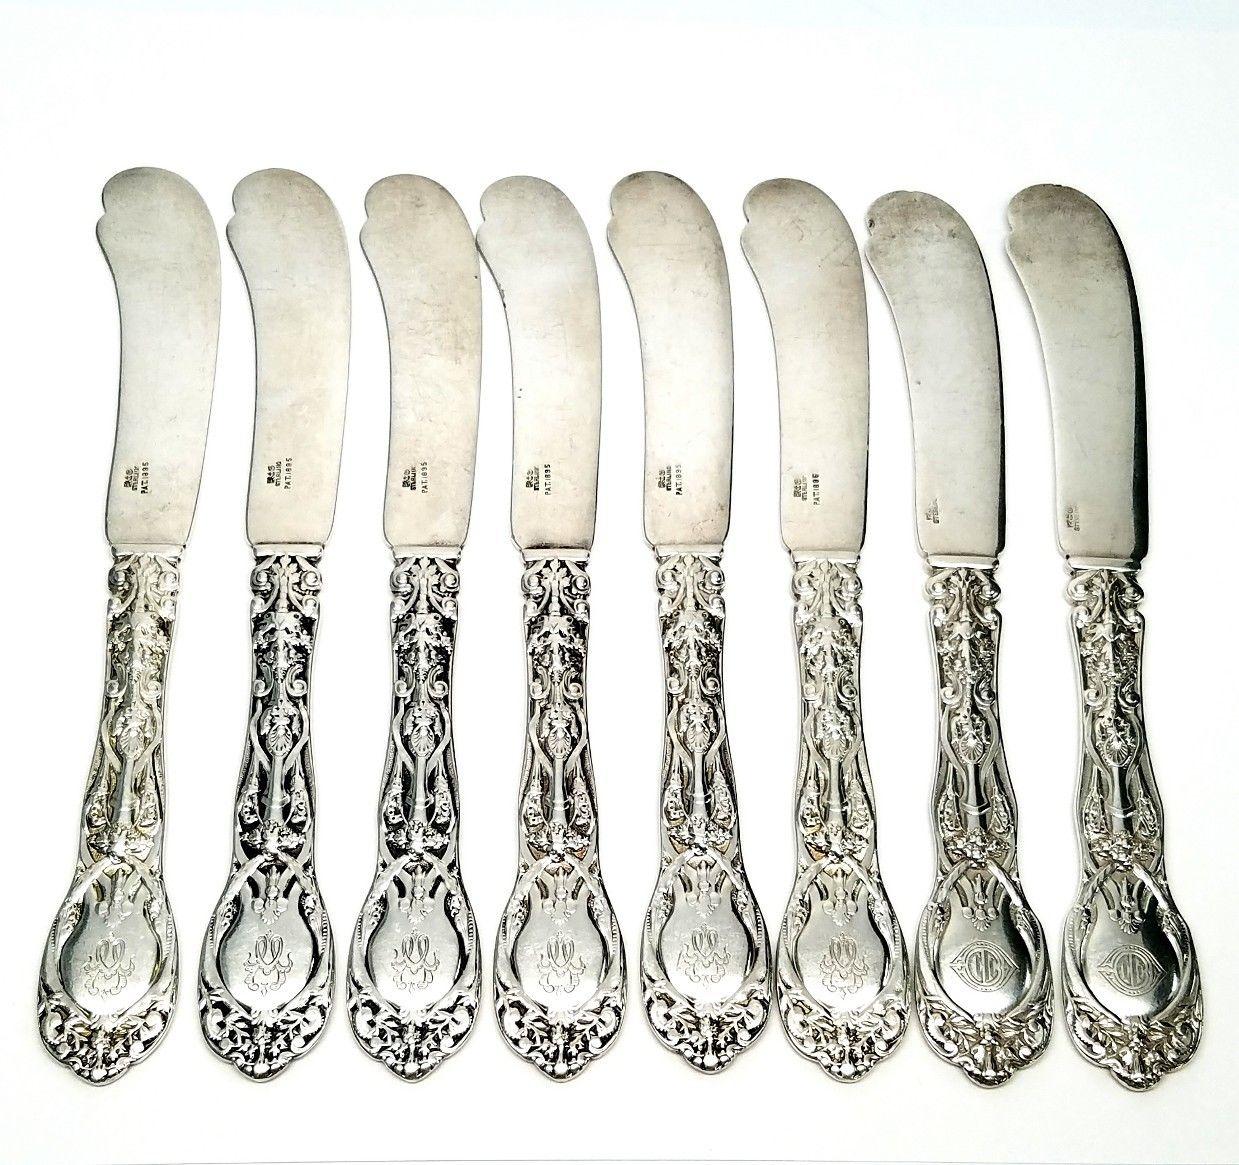 Set of 8 Gorham sterling silver butter knives in the Mythologique pattern. Of the 8 knives, there are 2 different monograms. See below for monogram details. Marked: lion anchor G STERLING PAT 1895. Monogram: W on 6 knives, appears to be JD on 2